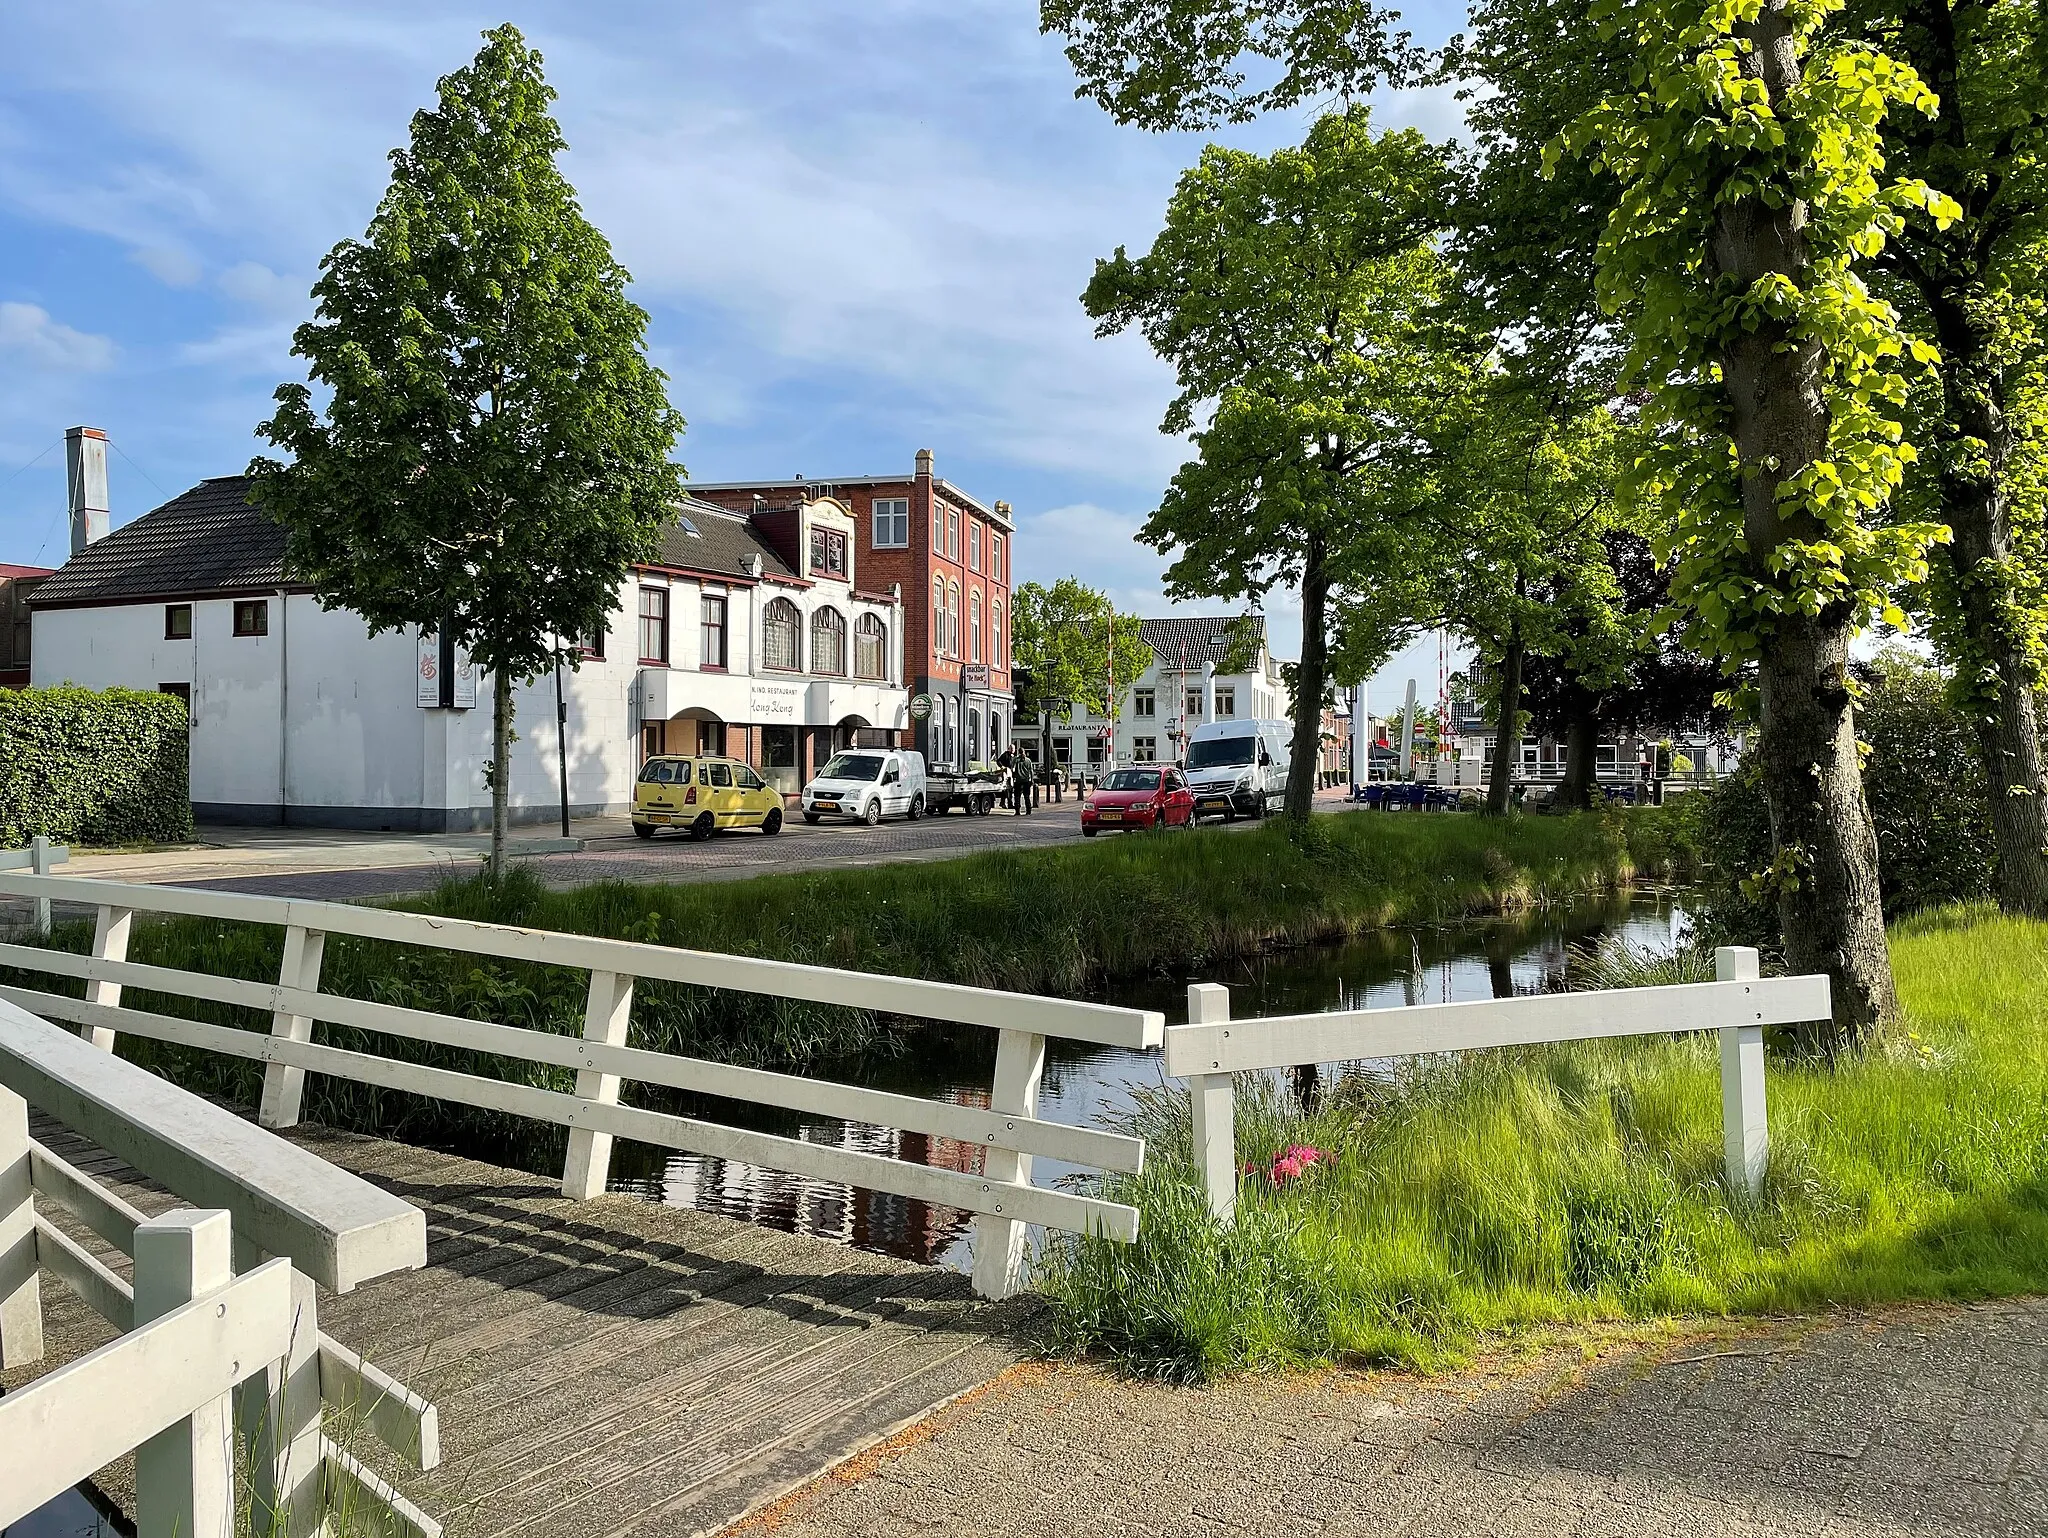 Photo showing: The Brinkstraat in Oosterwolde (Friesland, Netherlands) seen from the Quadoelenweg, with a footbridge over a branch of the 'Opsterlandse Compagnonsvaart'-canal.